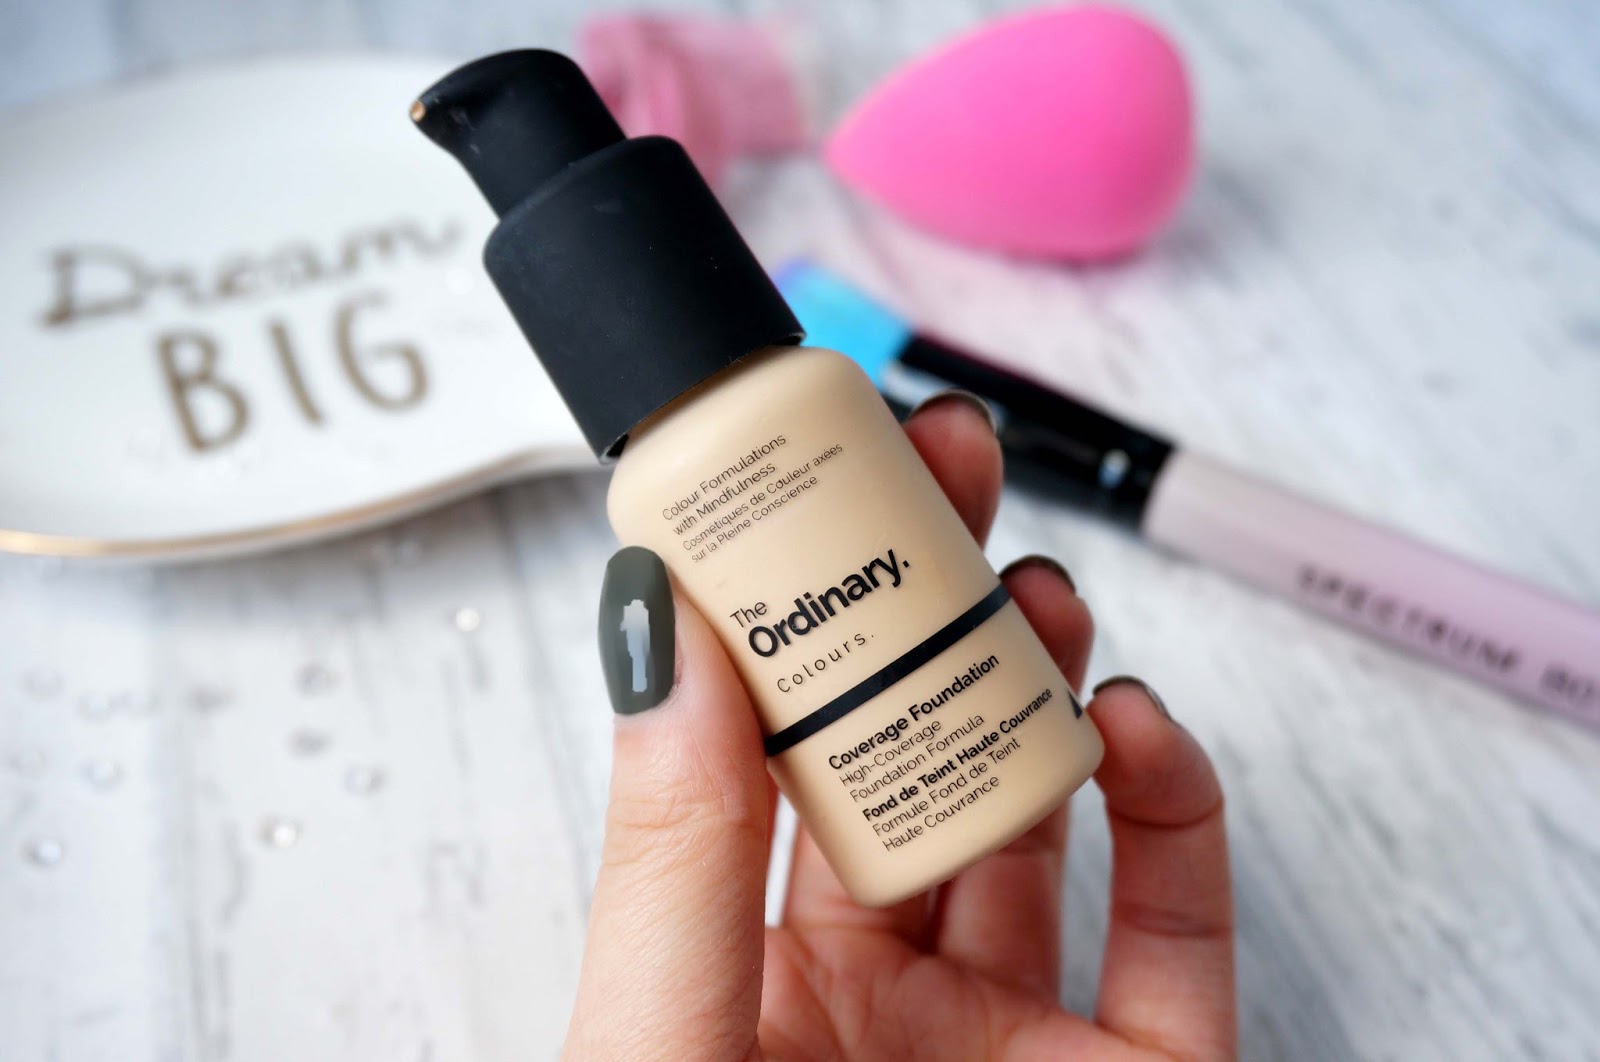 JOYCE LAU: THE ORDINARY £6 COVERAGE FOUNDATION REVIEW